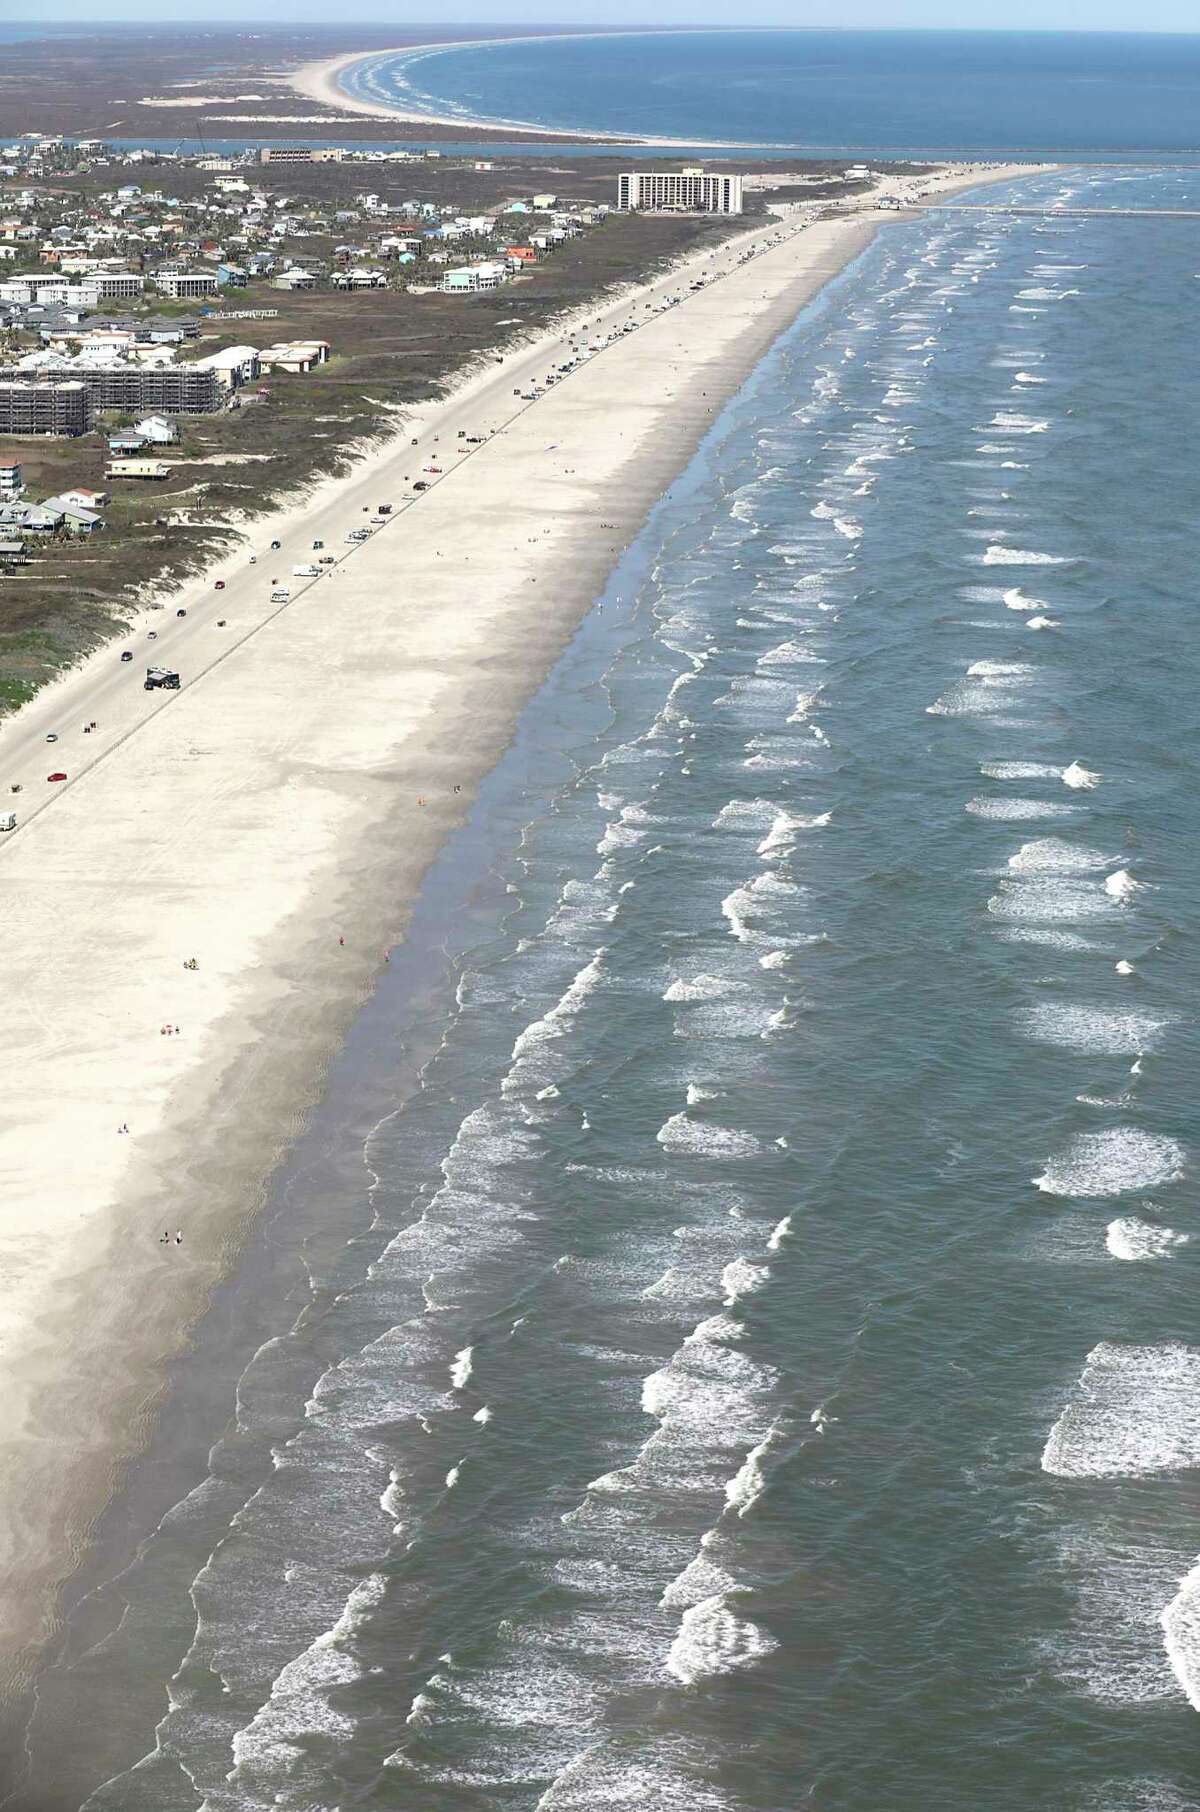 On Tuesday, Port Aransas officials announced the beach will be closed to vehicular traffic from 8 p.m. Thursday to 9 a.m. Saturday due to possible flooding from Hurricane Delta.